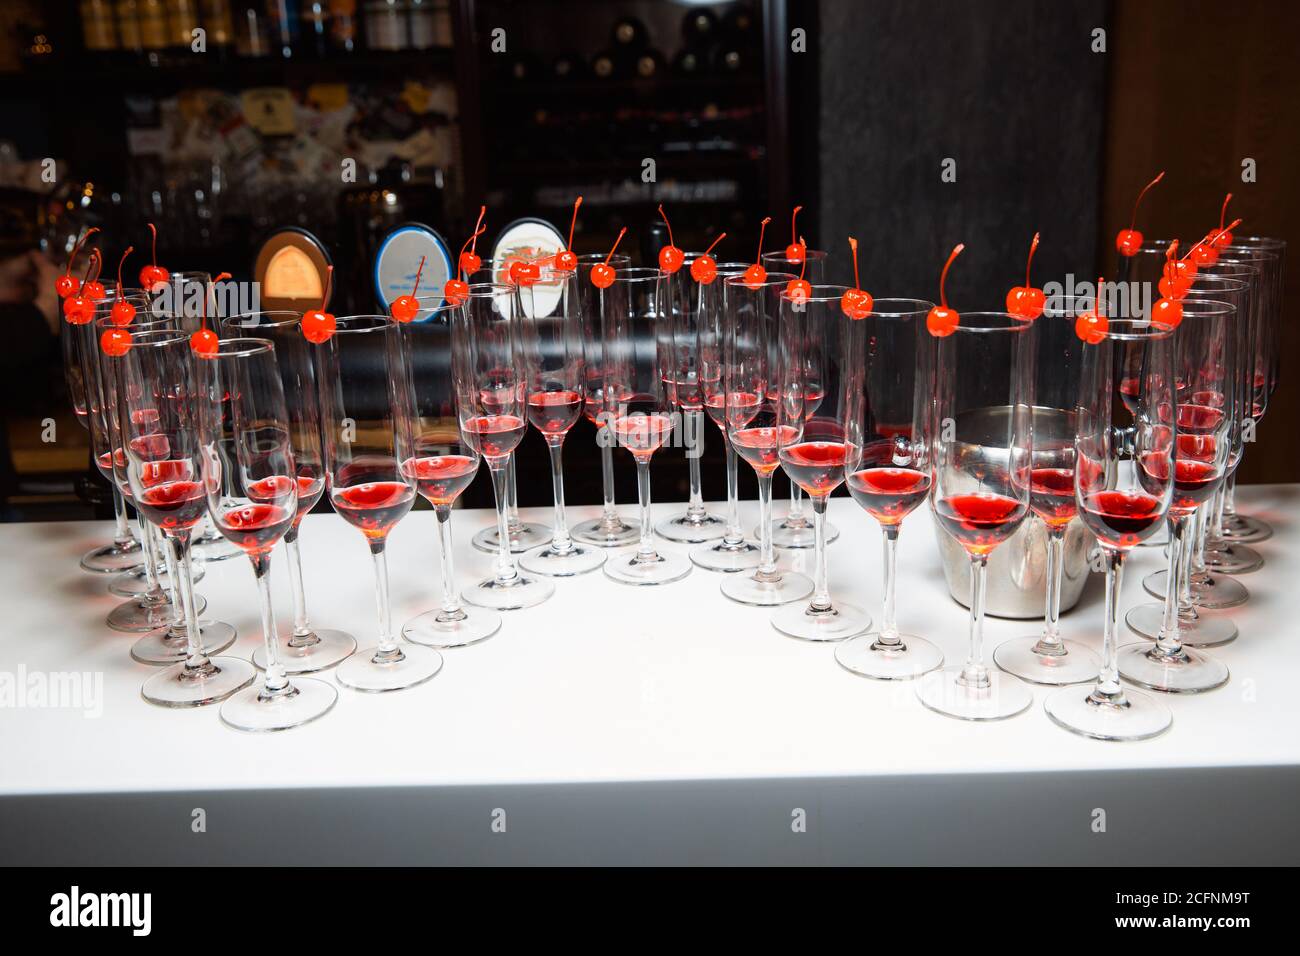 Empty wine glasses stand on a bar counter. On a glass of cherry for decoration. Stock Photo